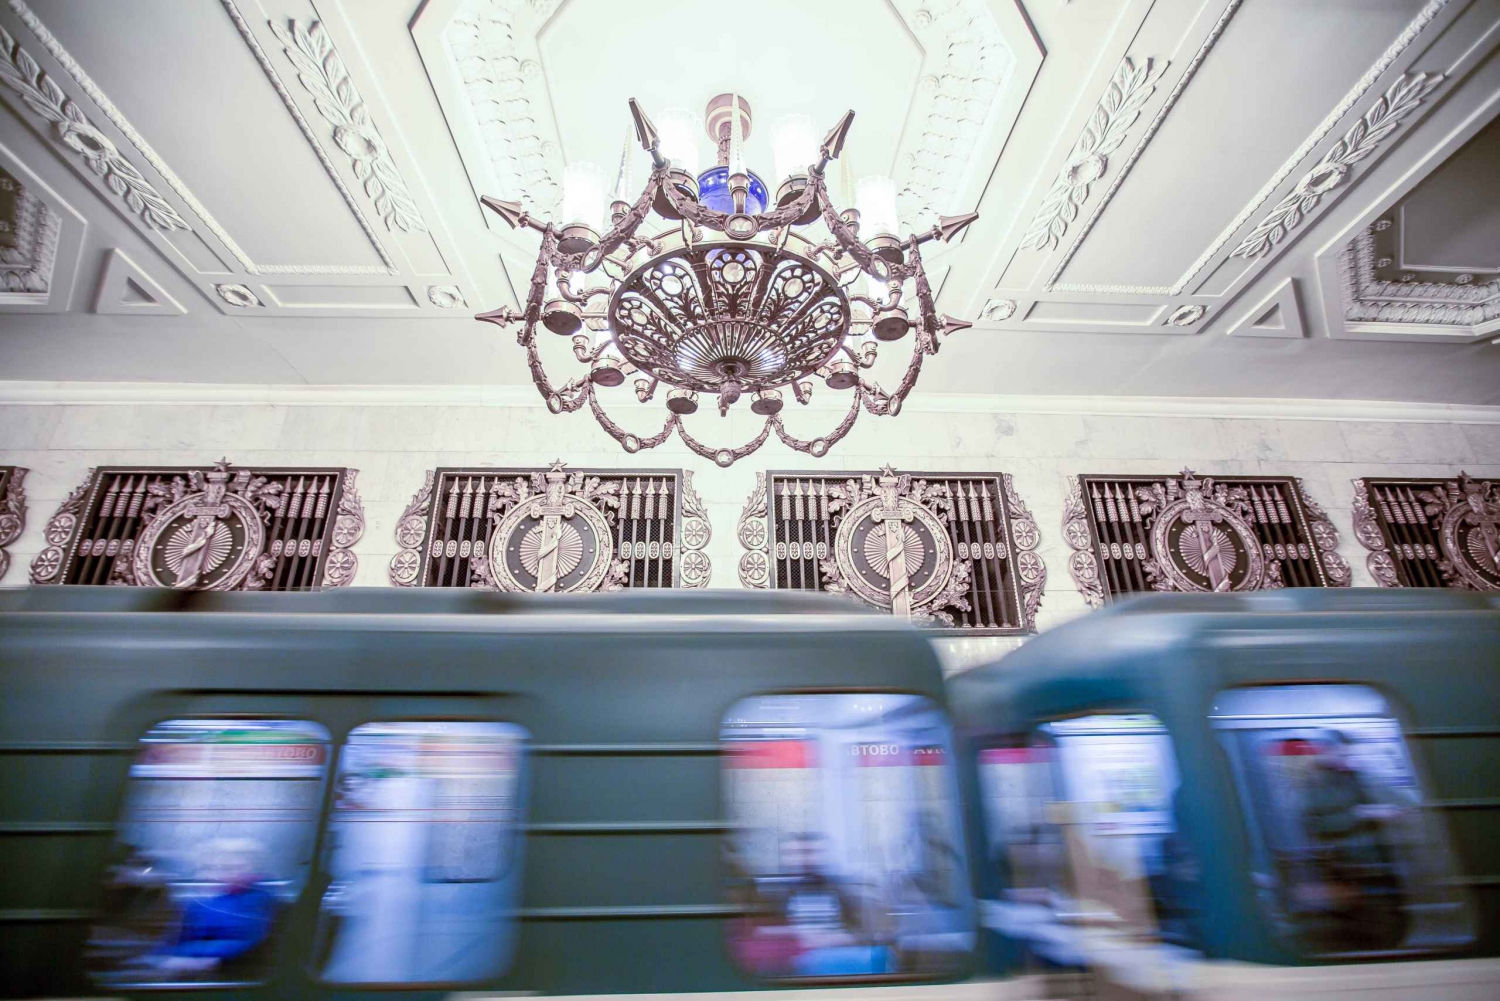 St. Petersburg Metro Stations 1.5-Hour Tour